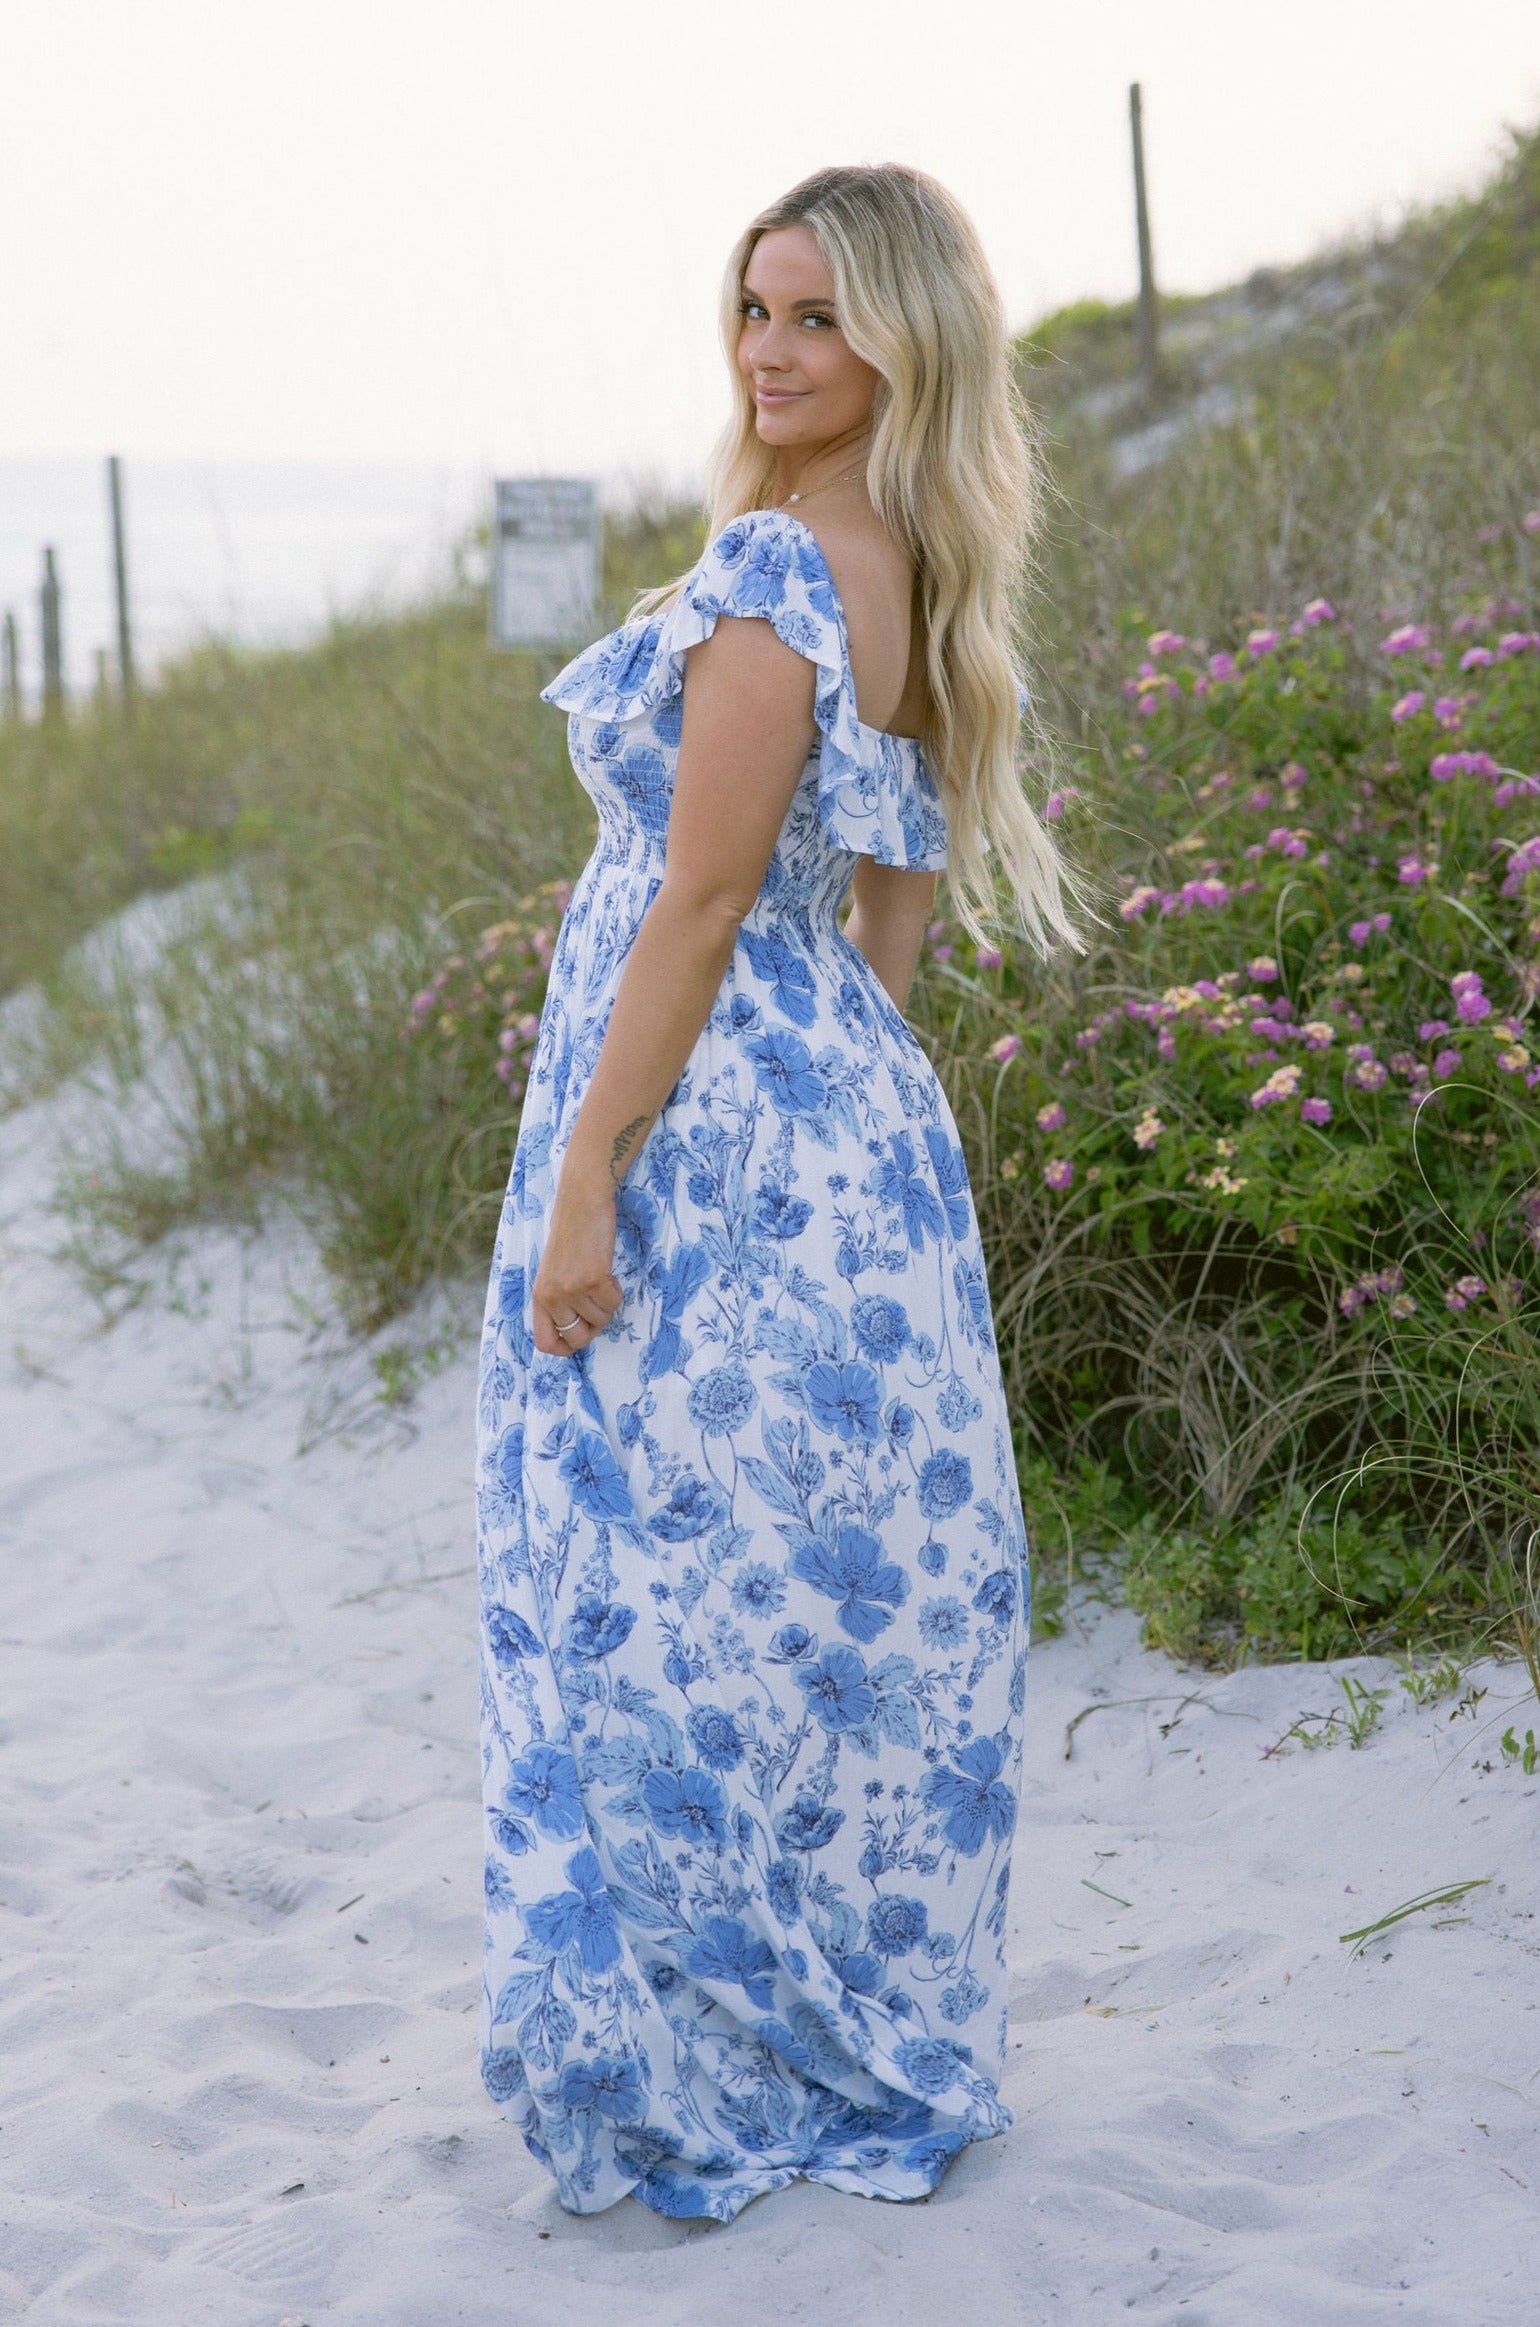 Full body side view of female model wearing the Camila White & Blue Floral Ruffle Maxi Dress which features Blue and White Floral Print, Maxi Skirt, Slit Detail, White Lining, Smocked Upper and Ruffle Straps